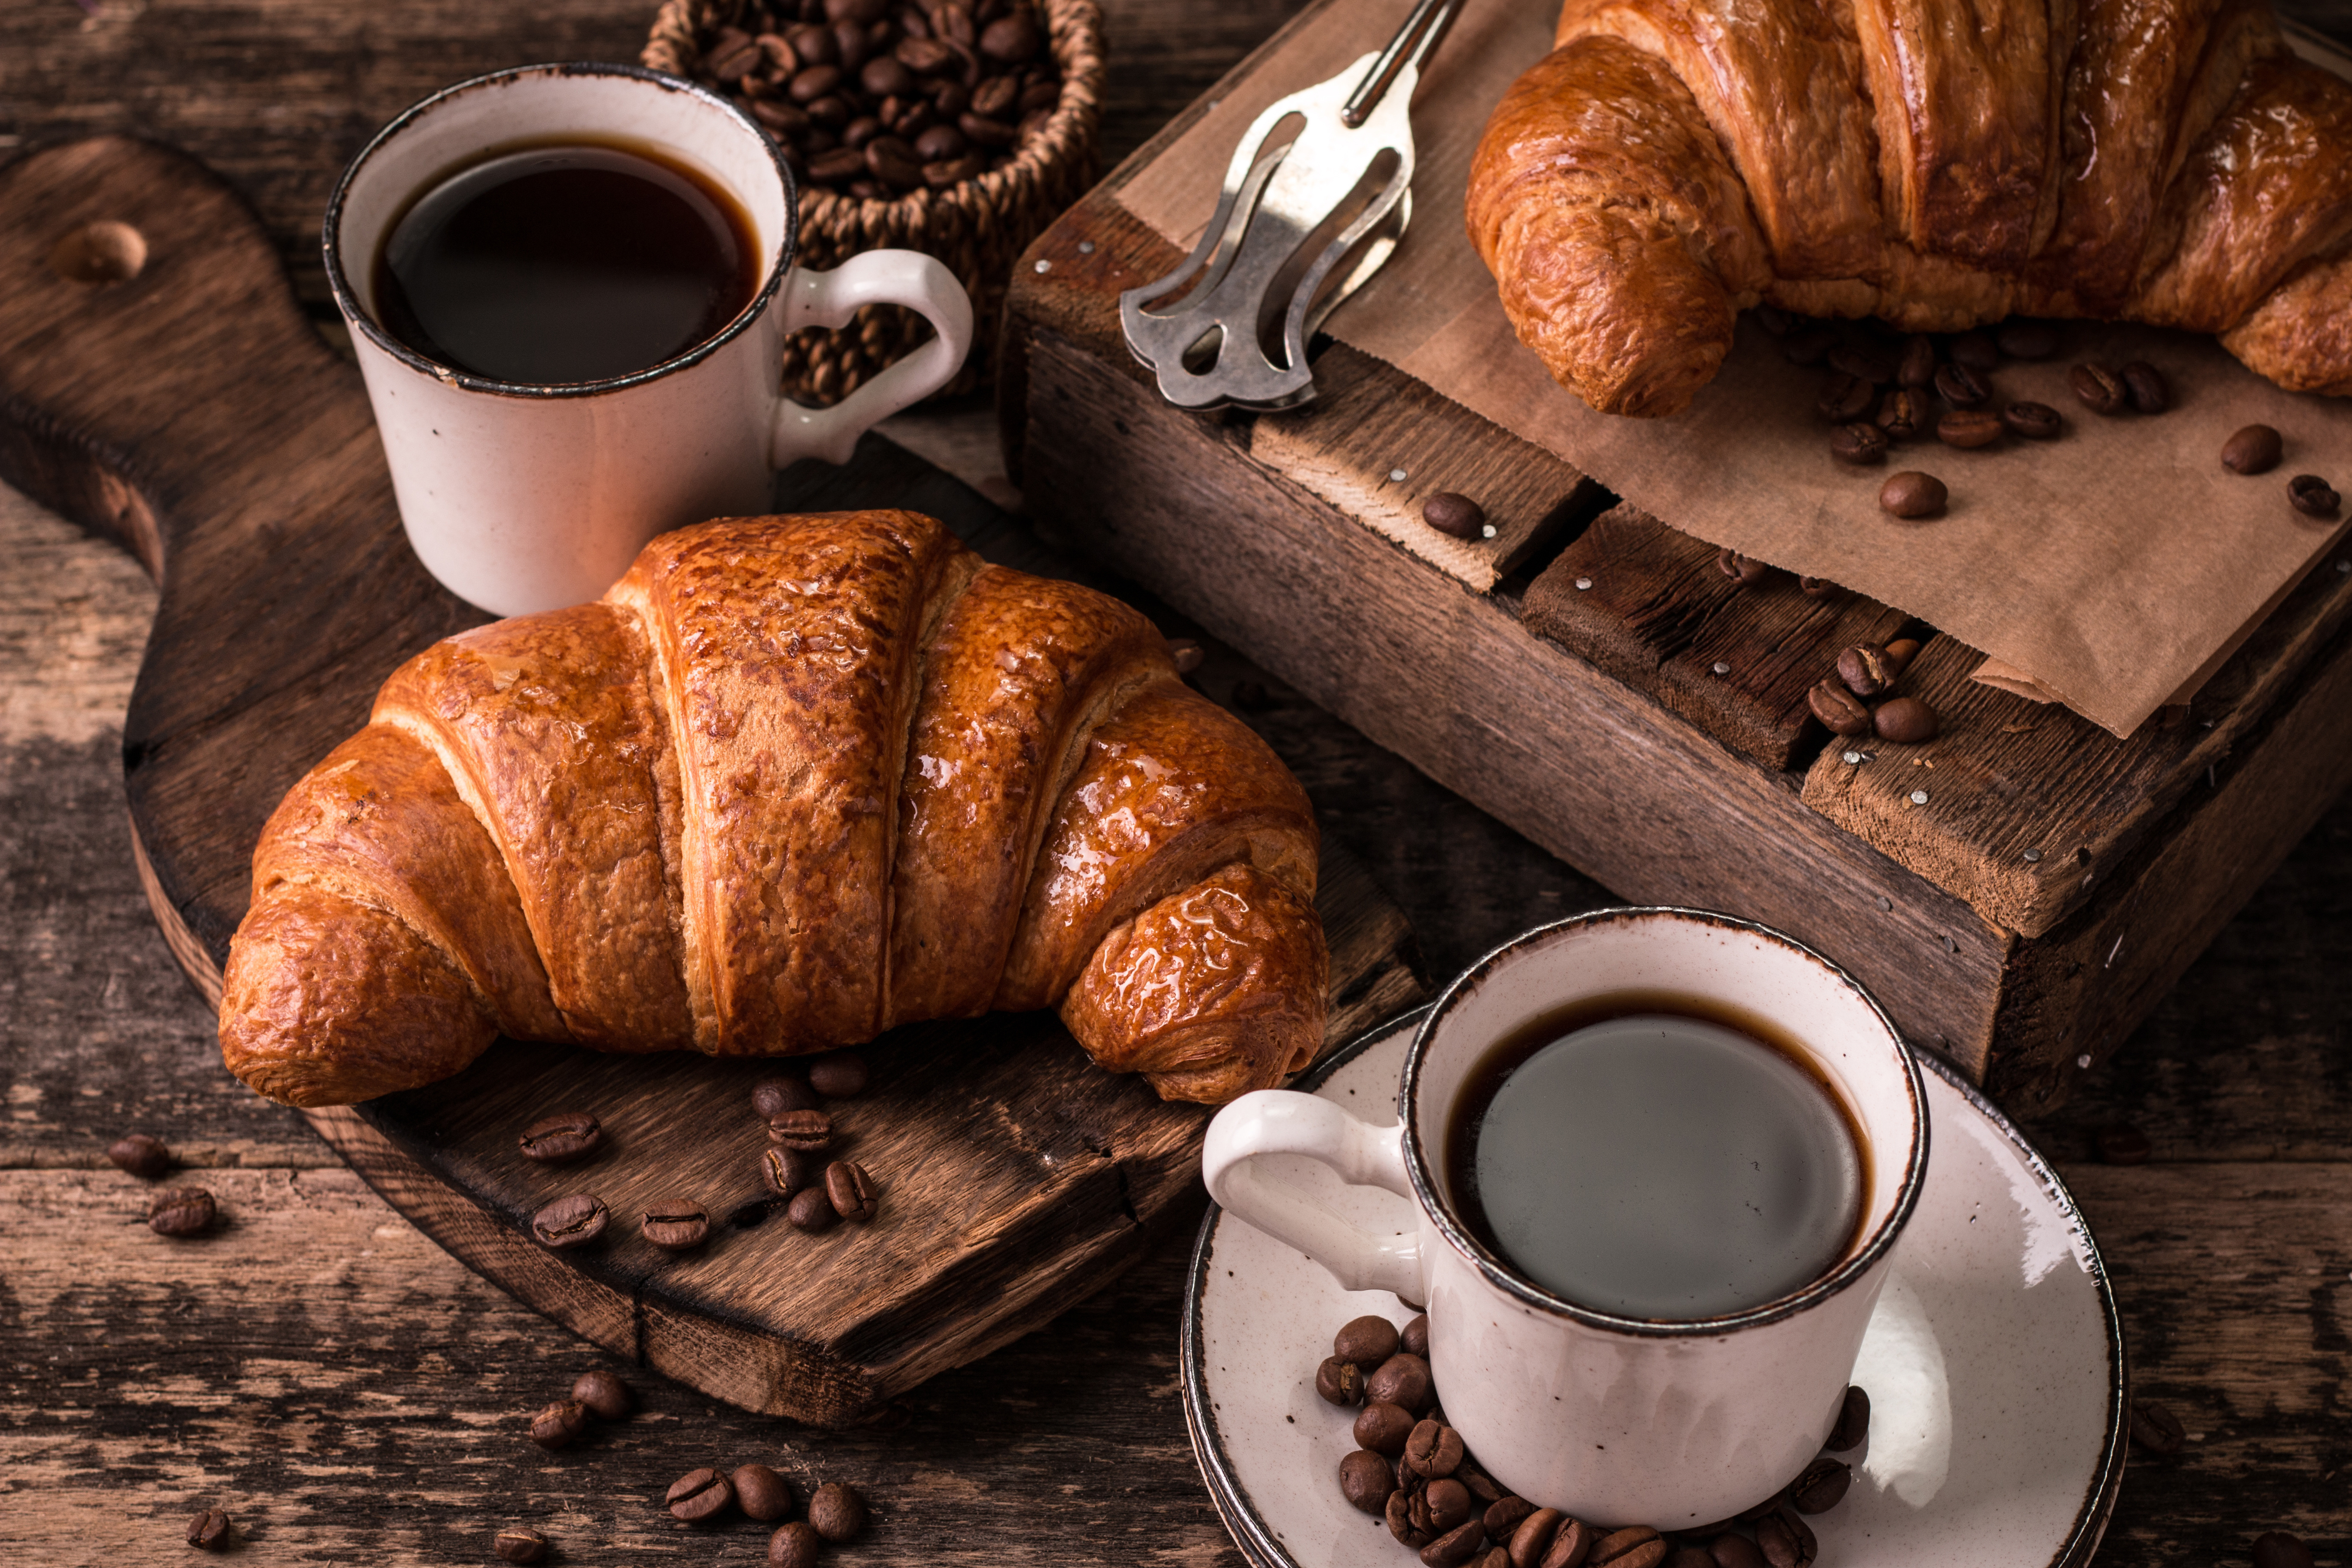 Still Life Cup Drink Croissant Viennoiserie Coffee Beans 5472x3648